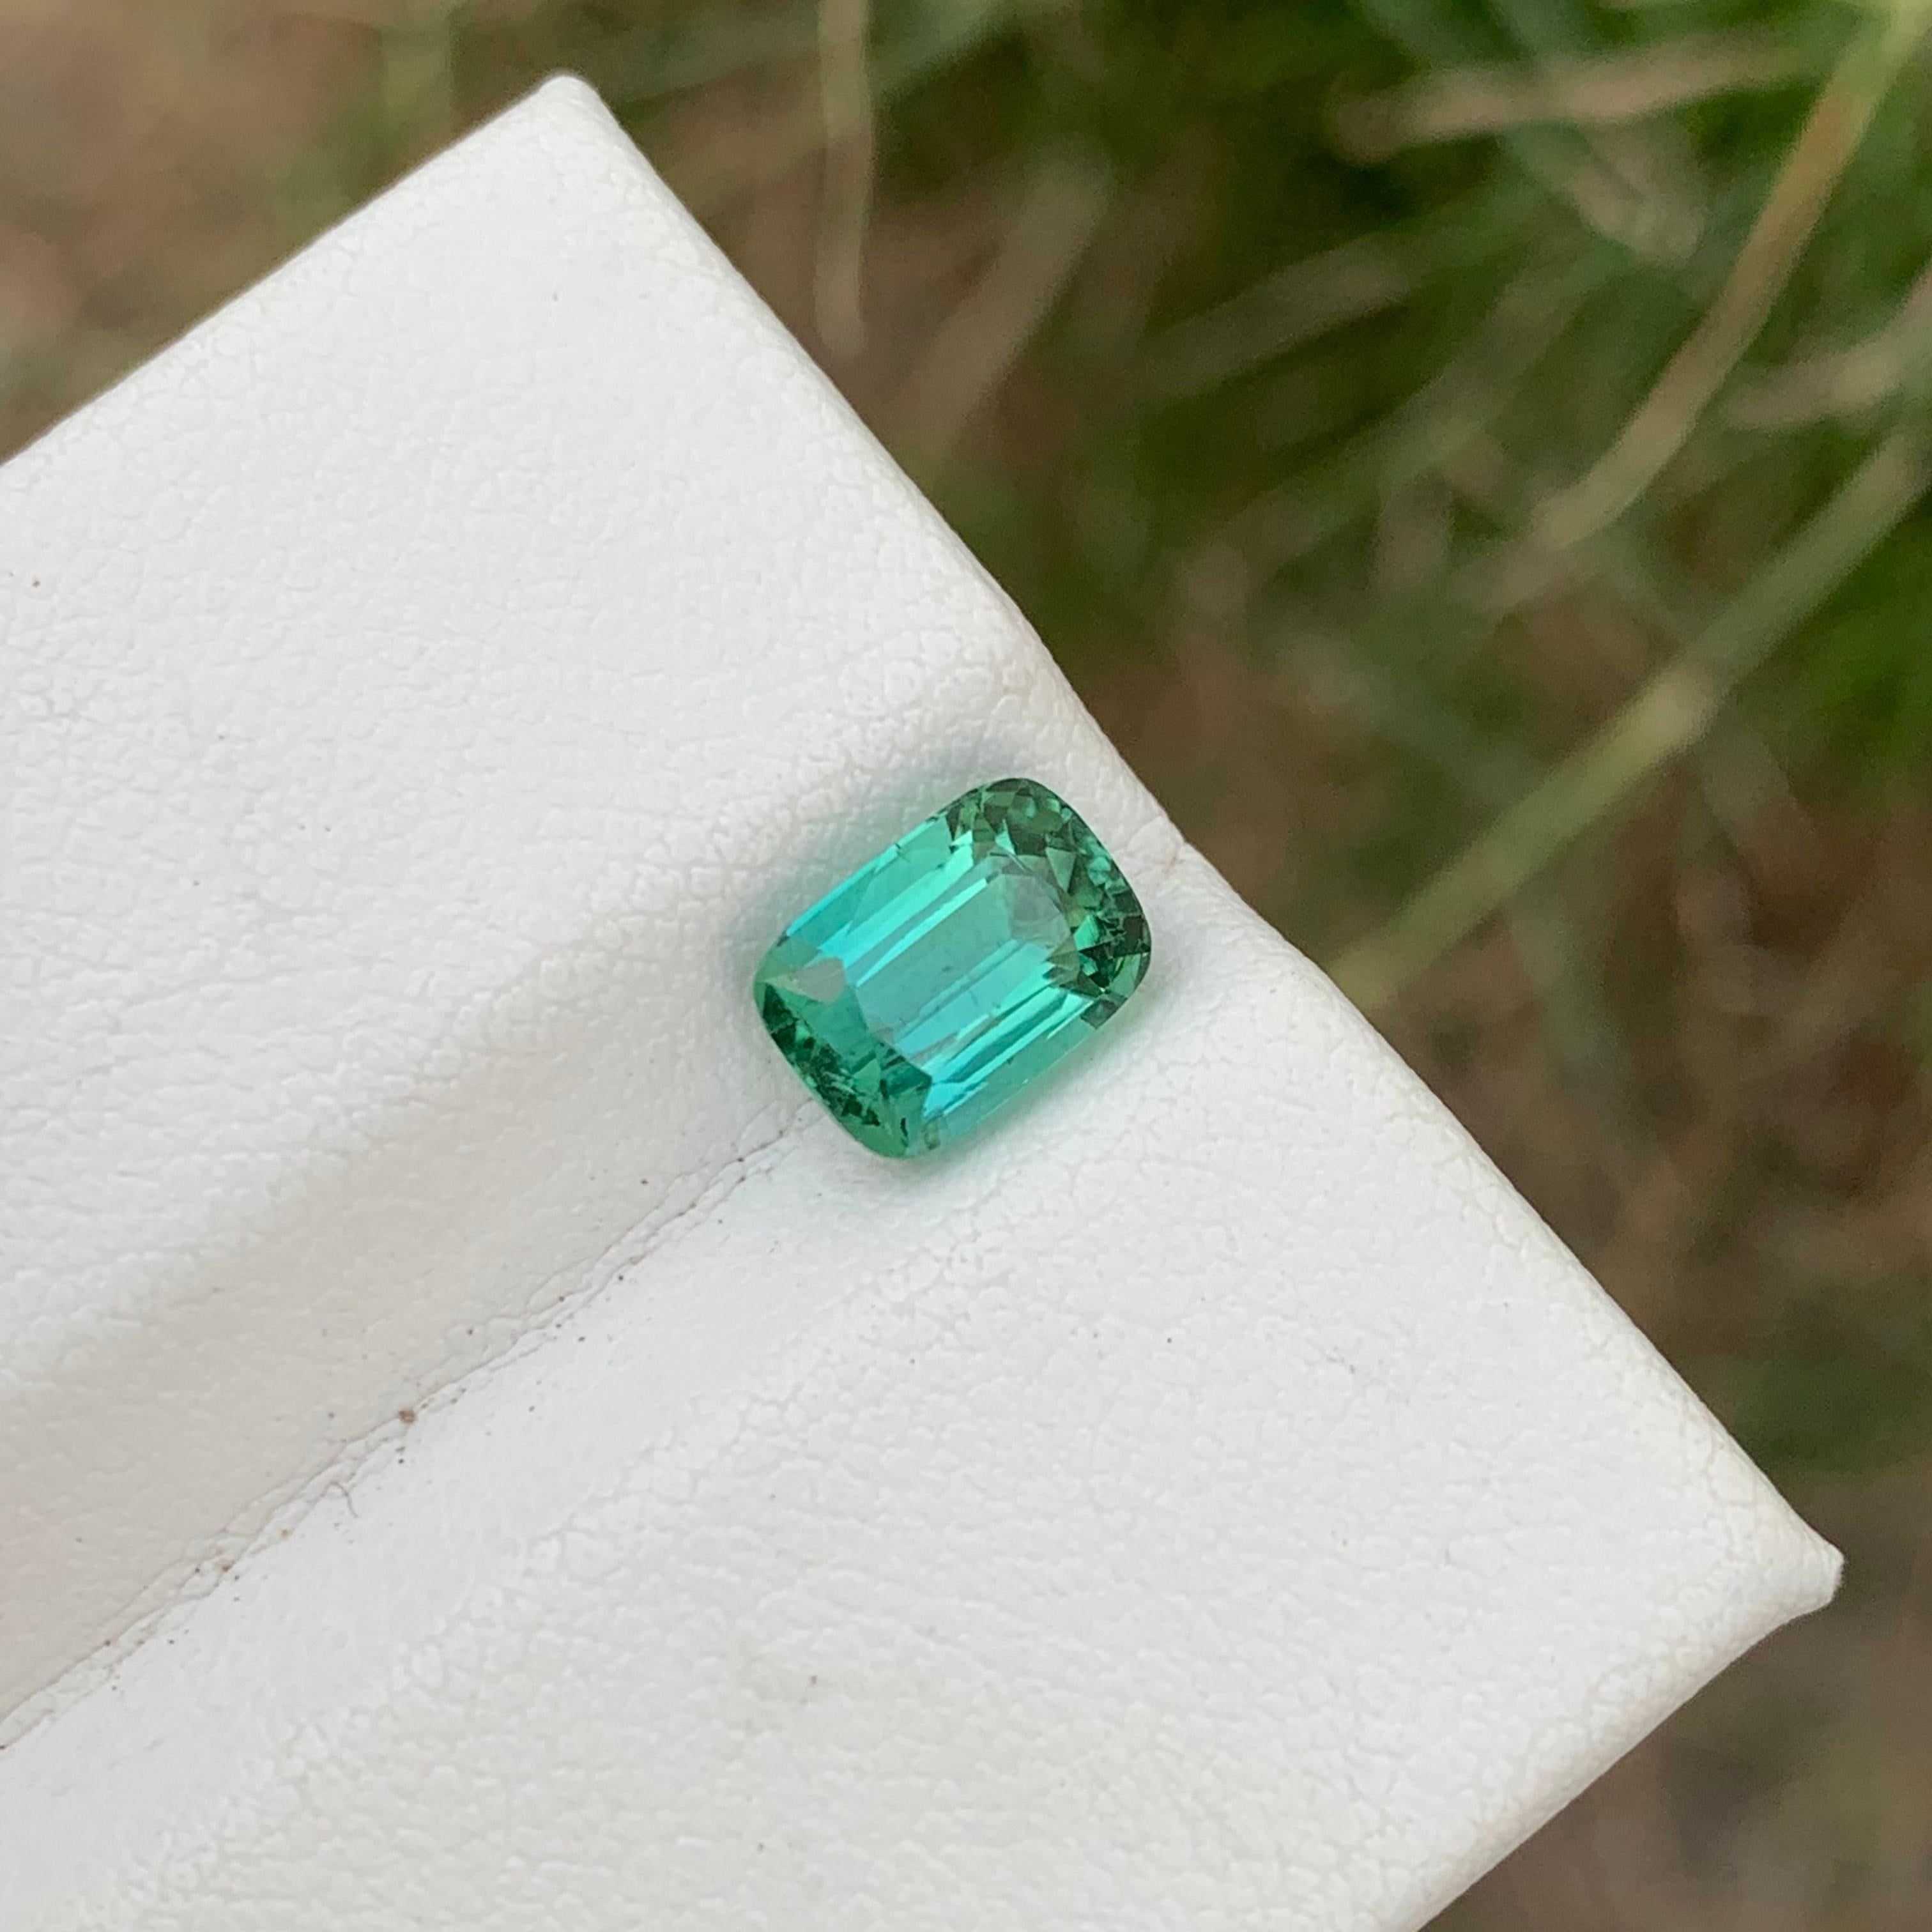 Cushion Cut Beauteous 1.90 Cts Blueish Green Loose Tourmaline Ring Gemstone Afghan Mine  For Sale